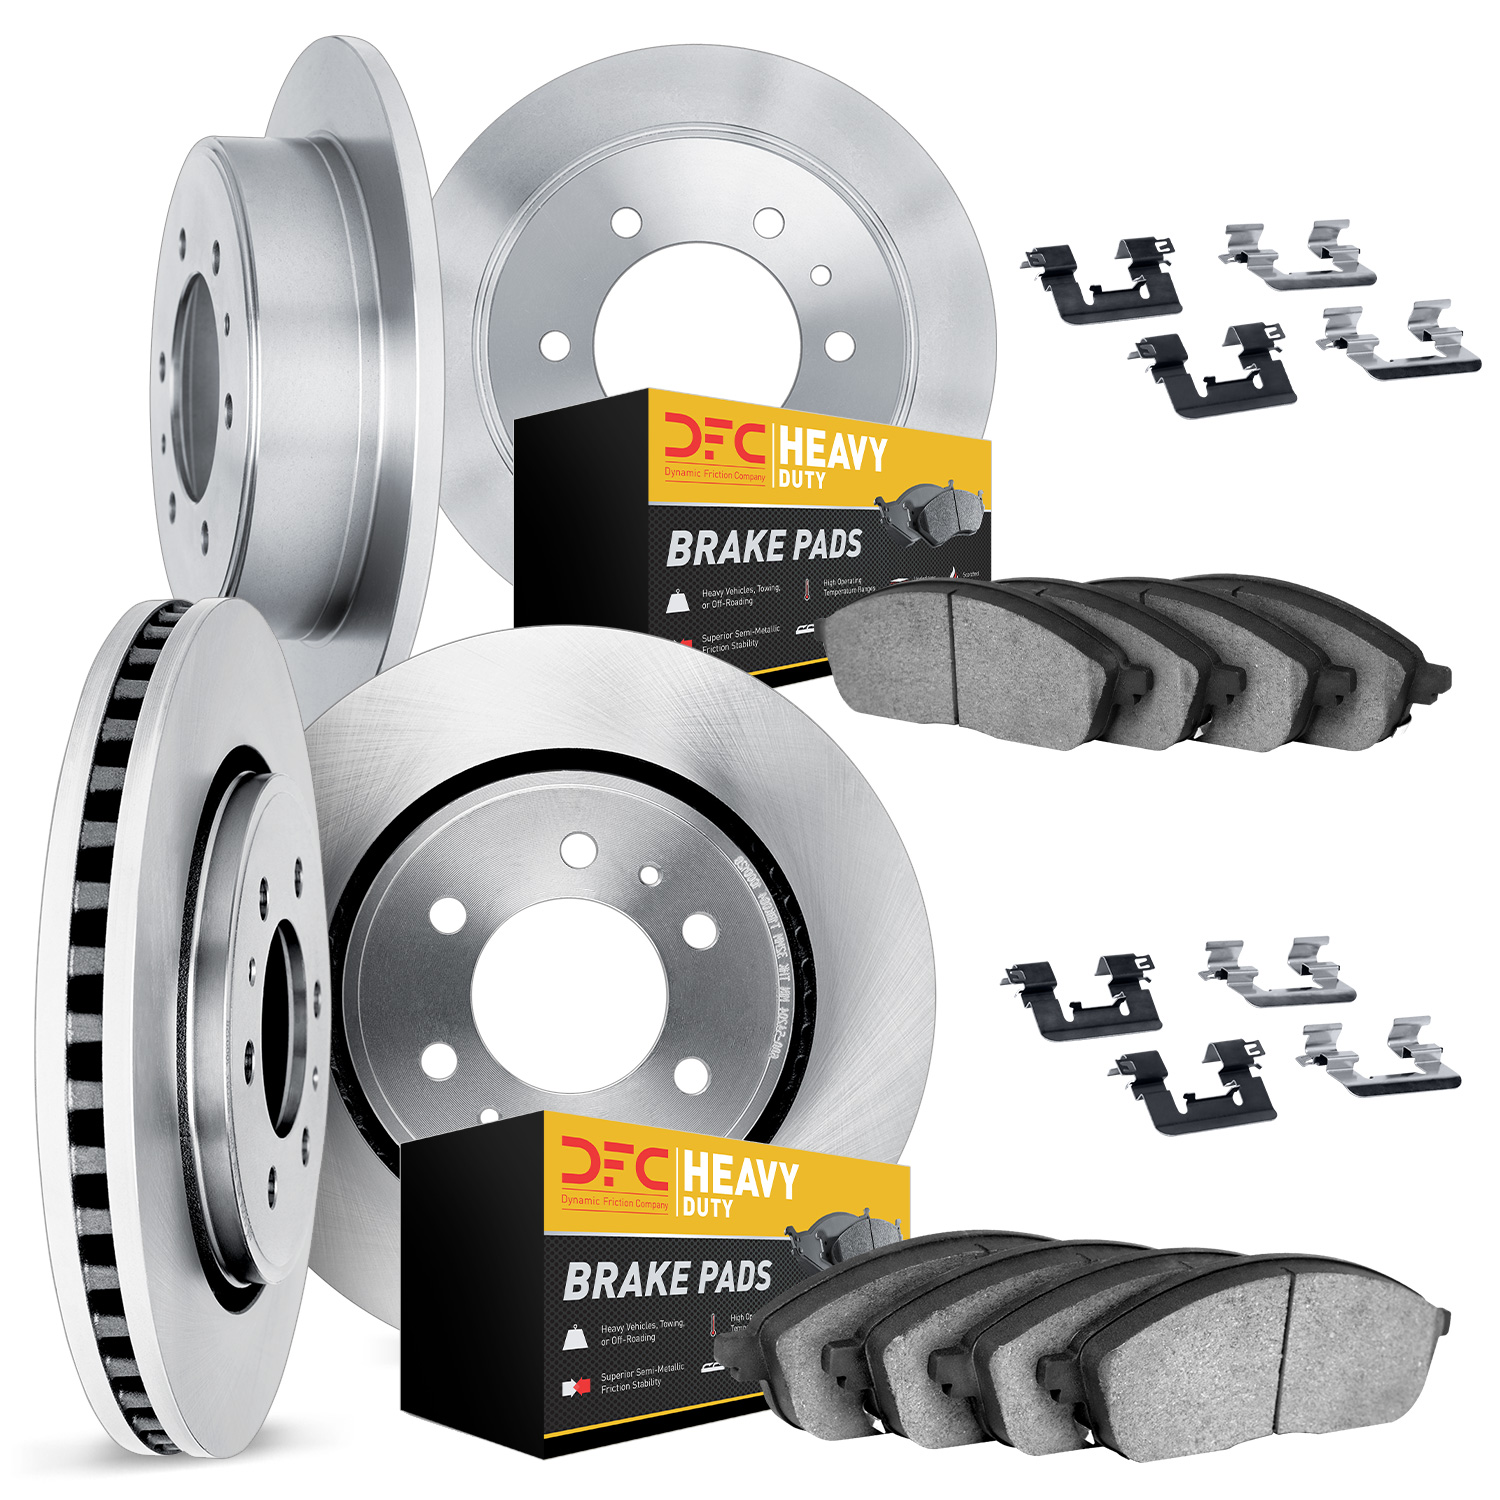 6214-40716 Brake Rotors w/Heavy-Duty Brake Pads Kit & Hardware, Fits Select Multiple Makes/Models, Position: Front and Rear